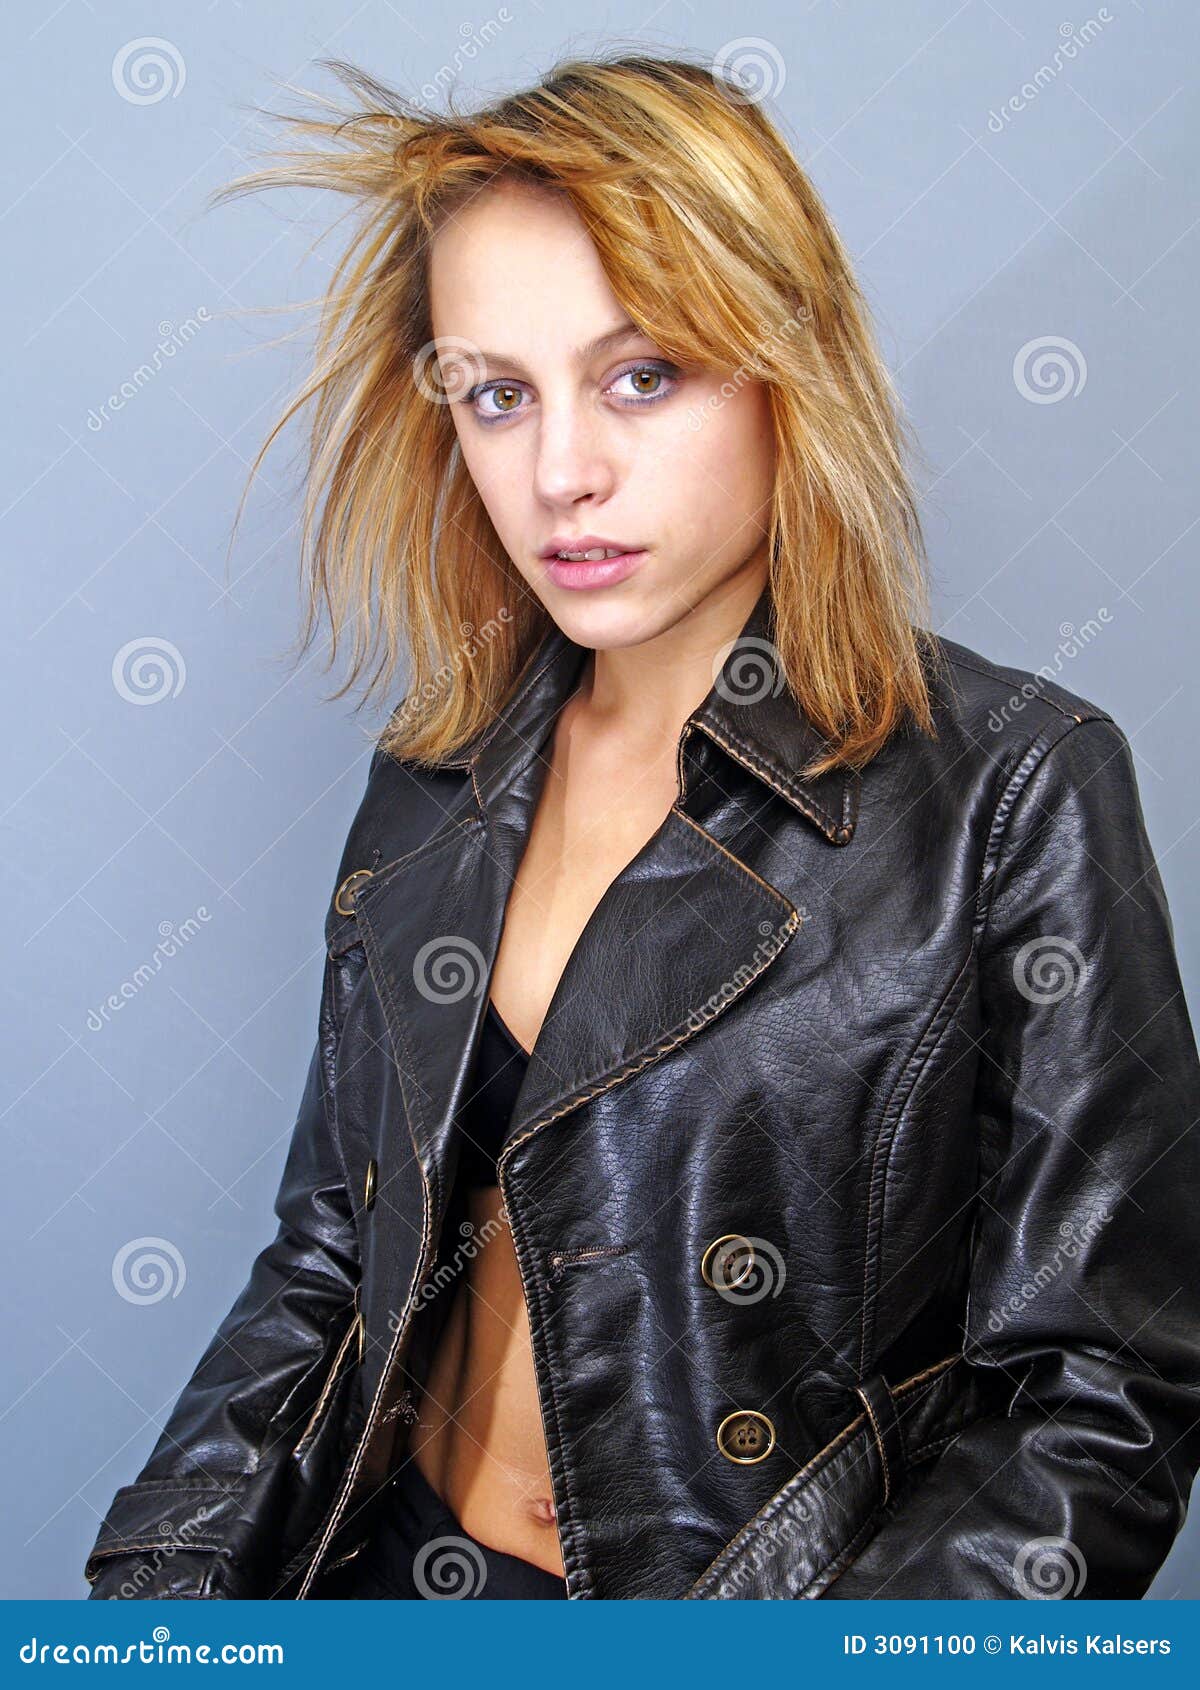 Women in leather stock photo. Image of glamour, face 